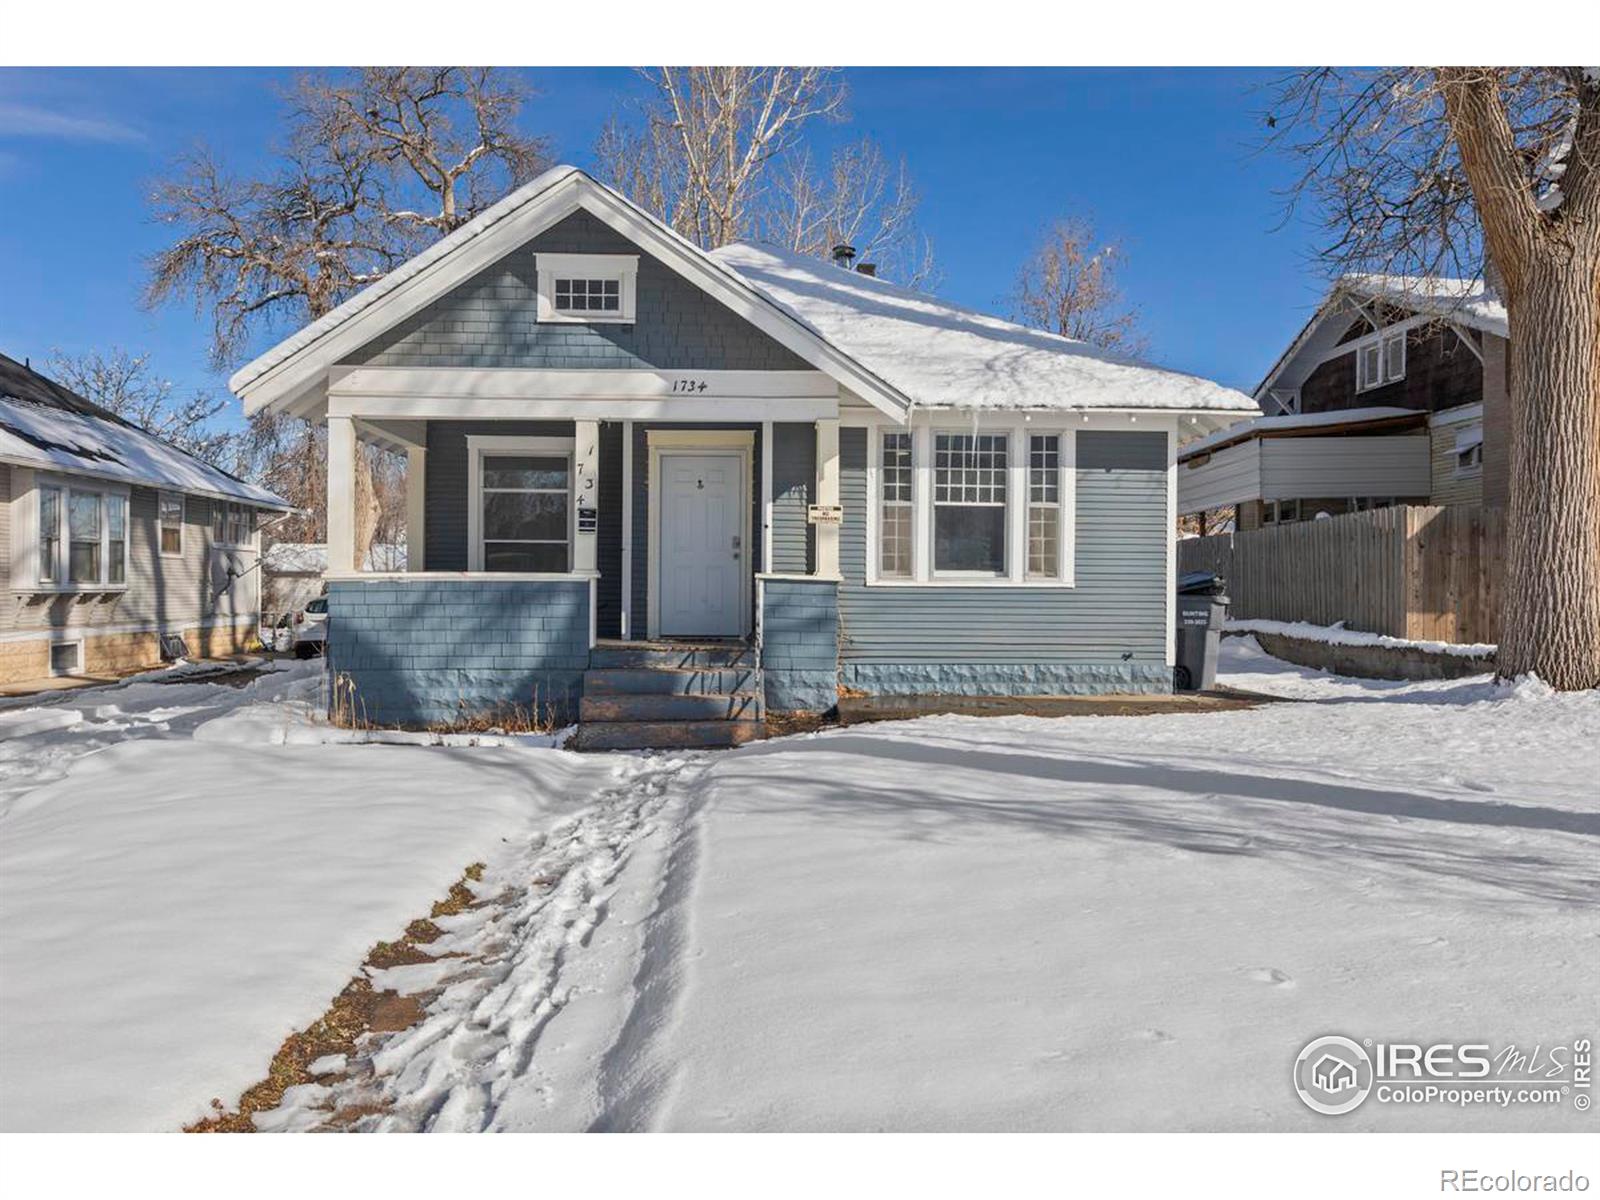 1734  7th Avenue, greeley MLS: 4567891003255 Beds: 0 Baths: 0 Price: $394,000